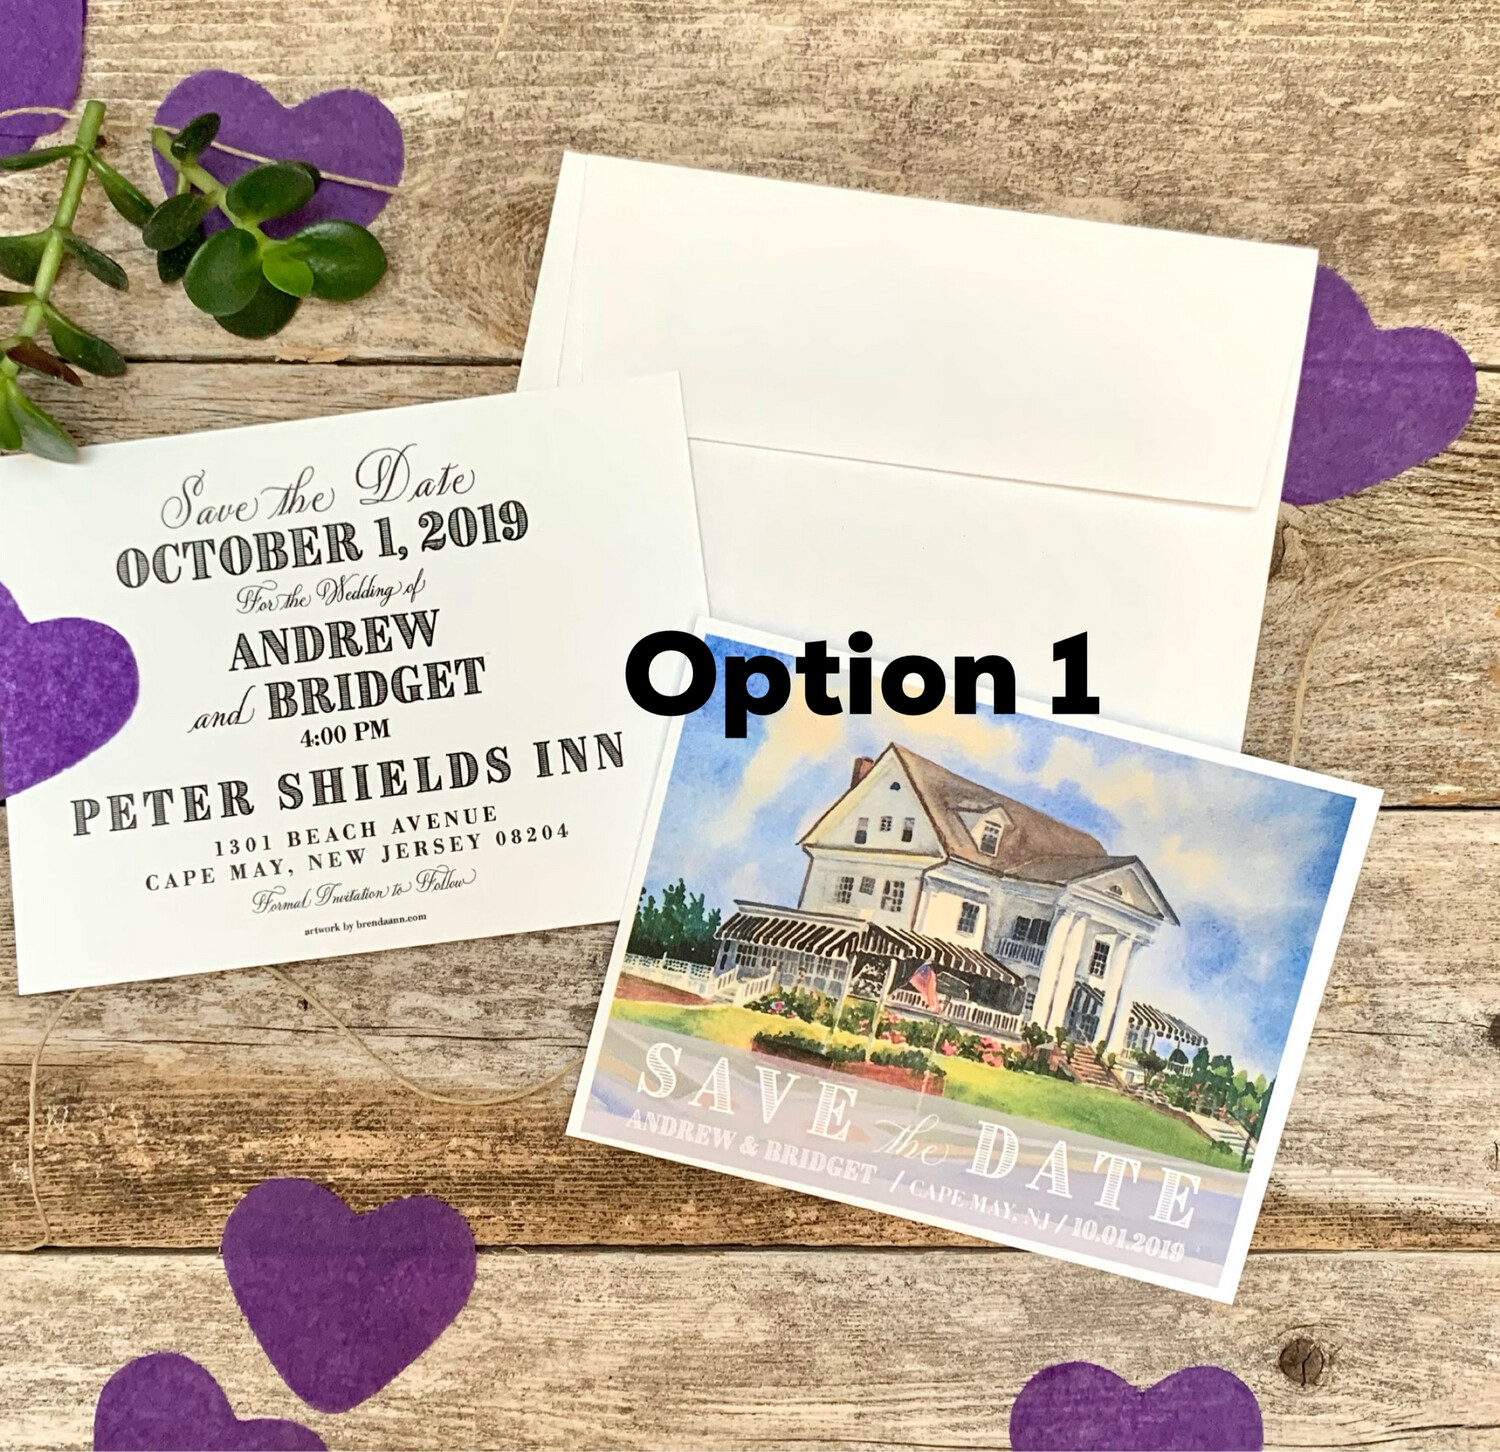 Peter Shields Inn Cape May NJ Watercolor Wedding Save the Date Cards